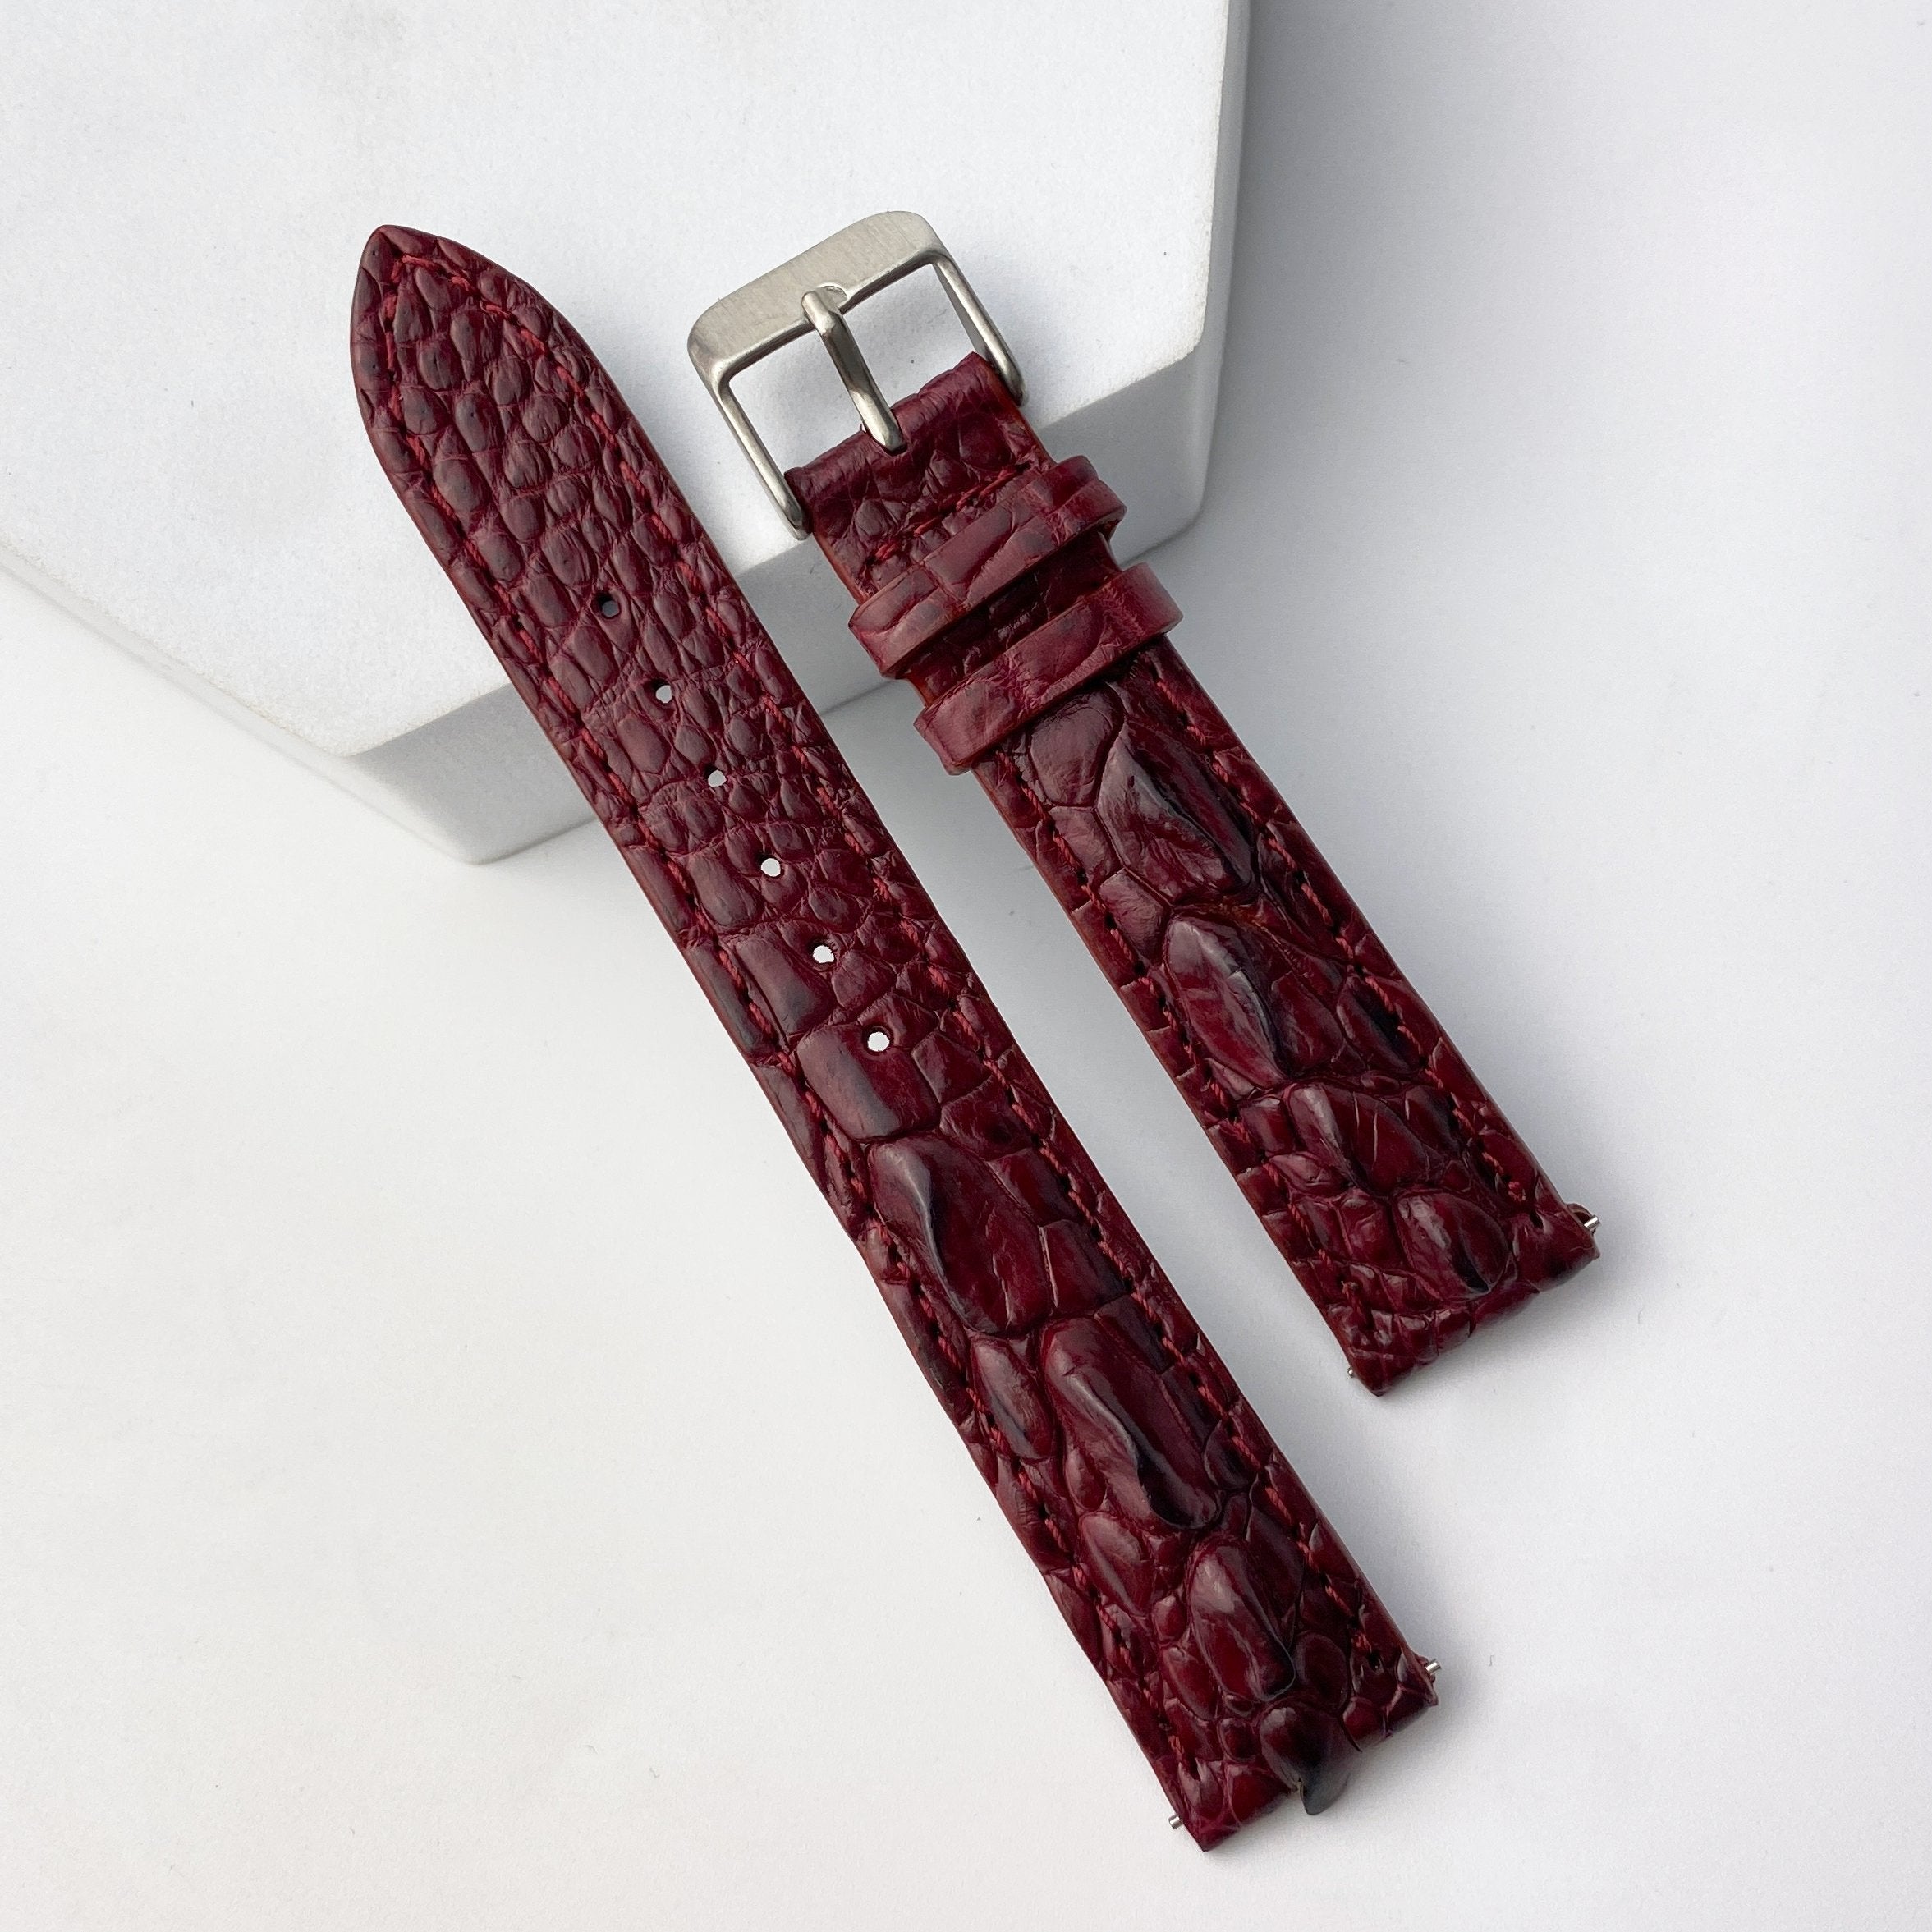 Purple Alligator Leather Watch Band For Men | Premium Crocodile Quick Release Replacement Wristwatch Strap | DH-109 - Vinacreations